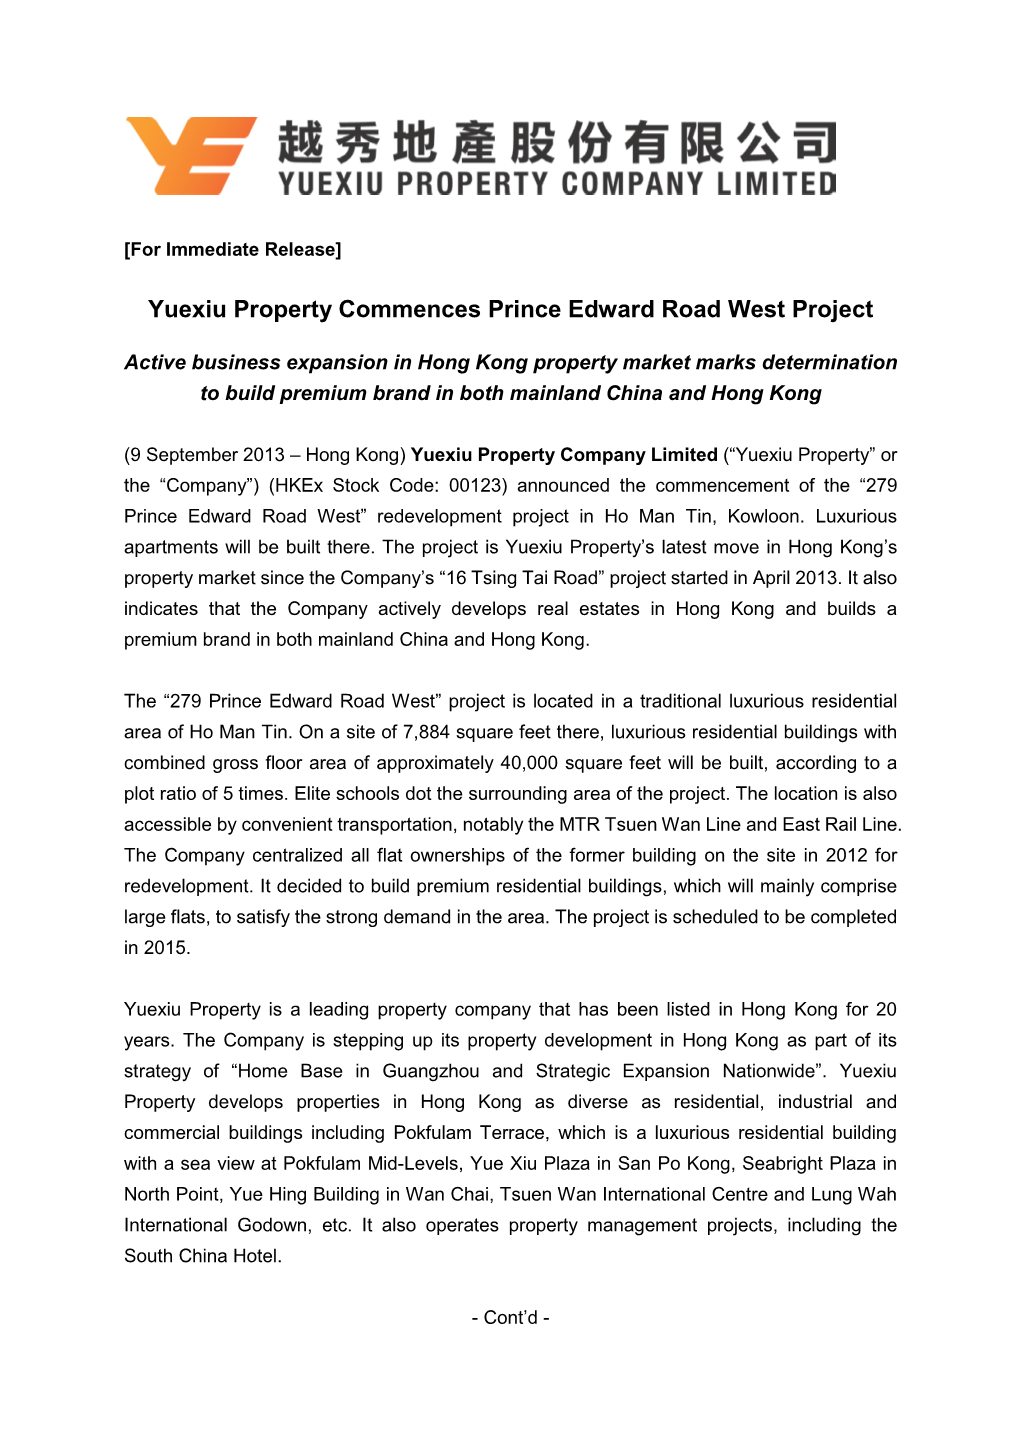 Yuexiu Property Commences Prince Edward Road West Project